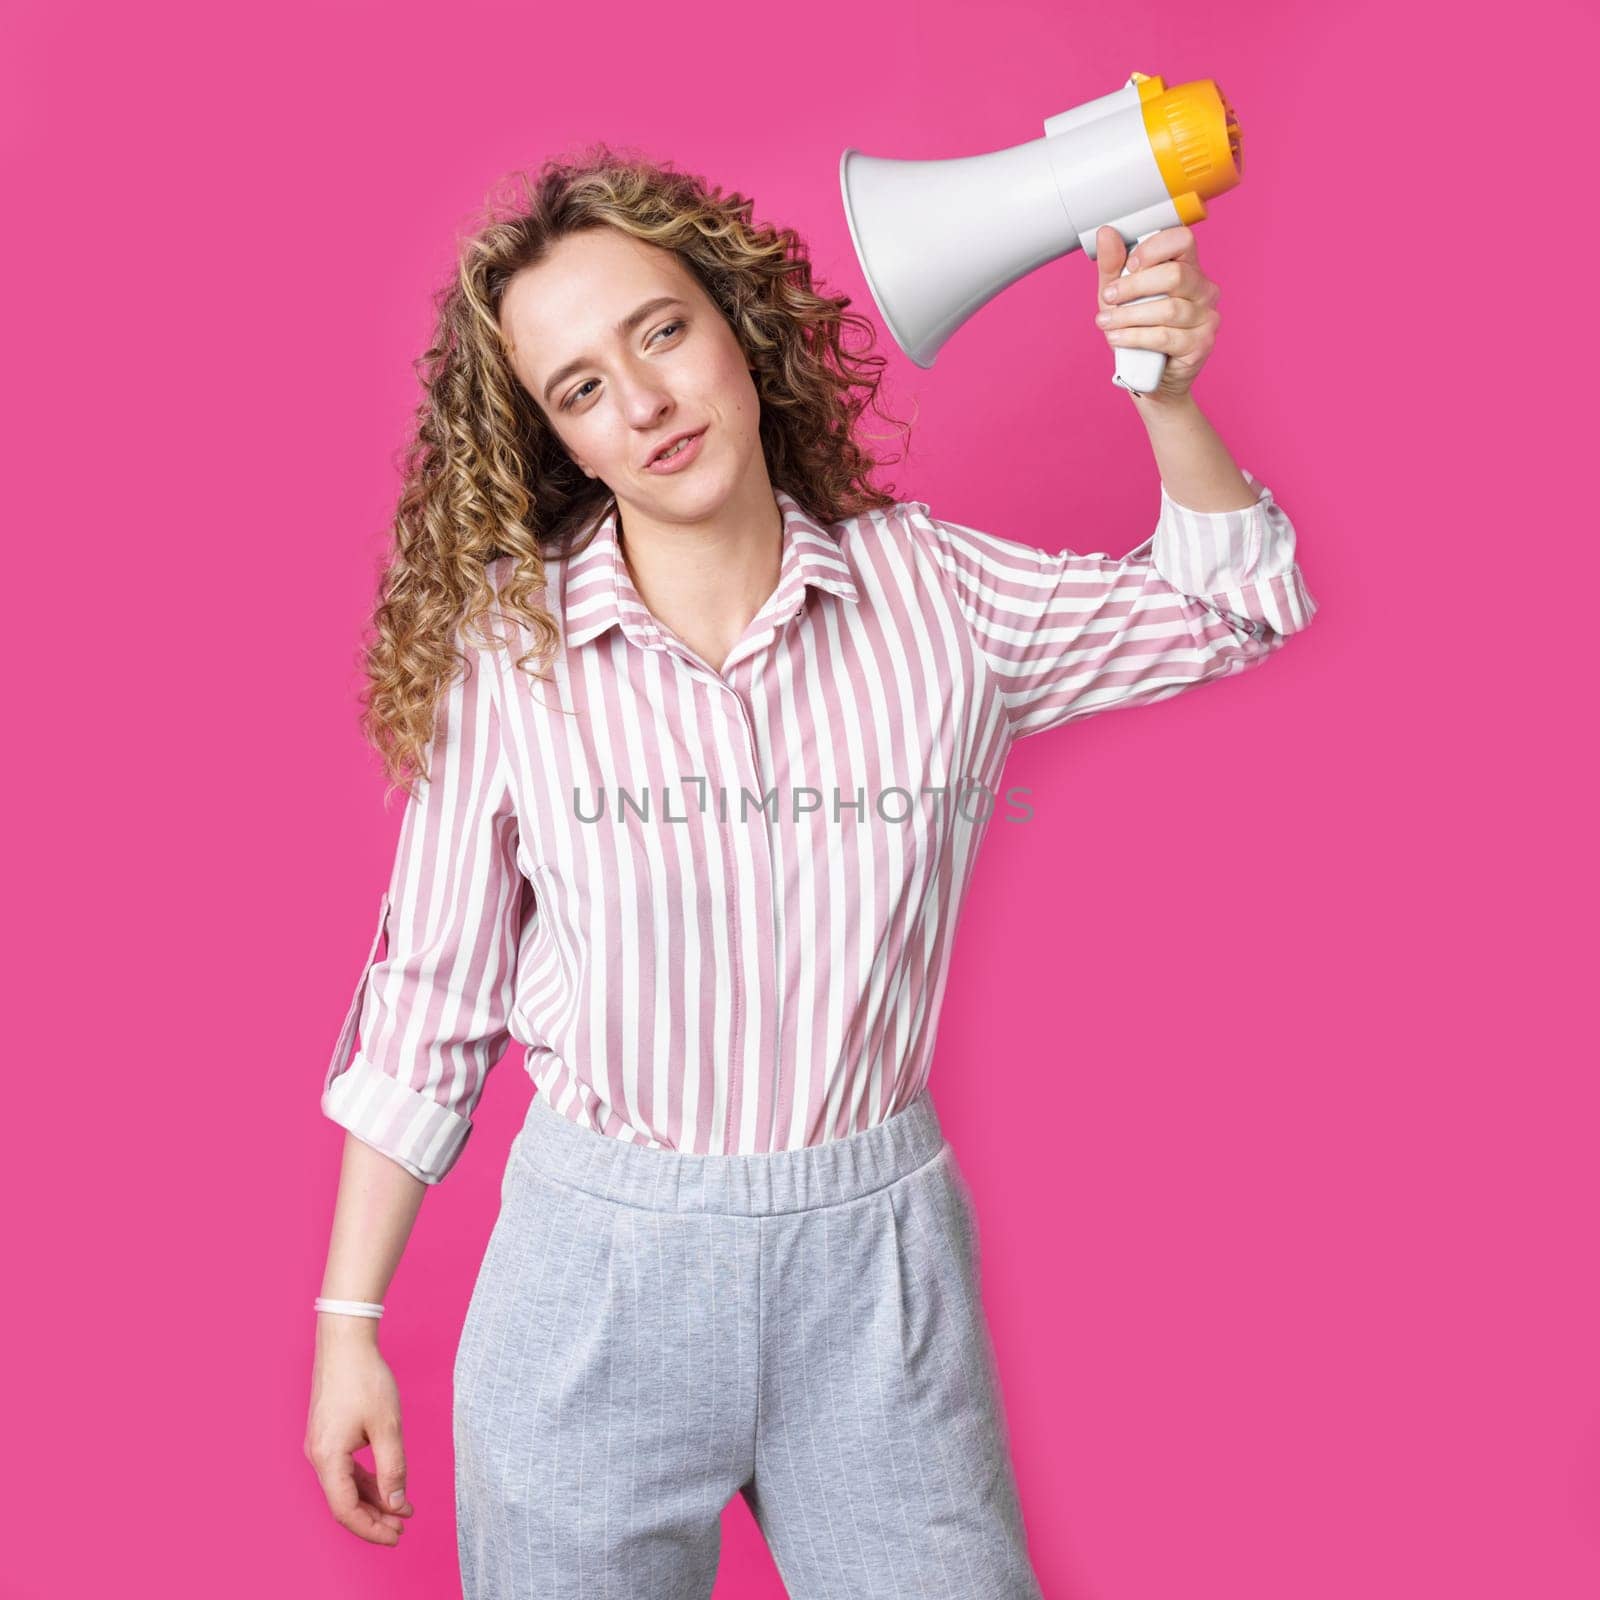 A young woman holds a screaming megaphone in her hands, which is aimed at her face. Isolated pink background. People sincere emotions lifestyle concept.